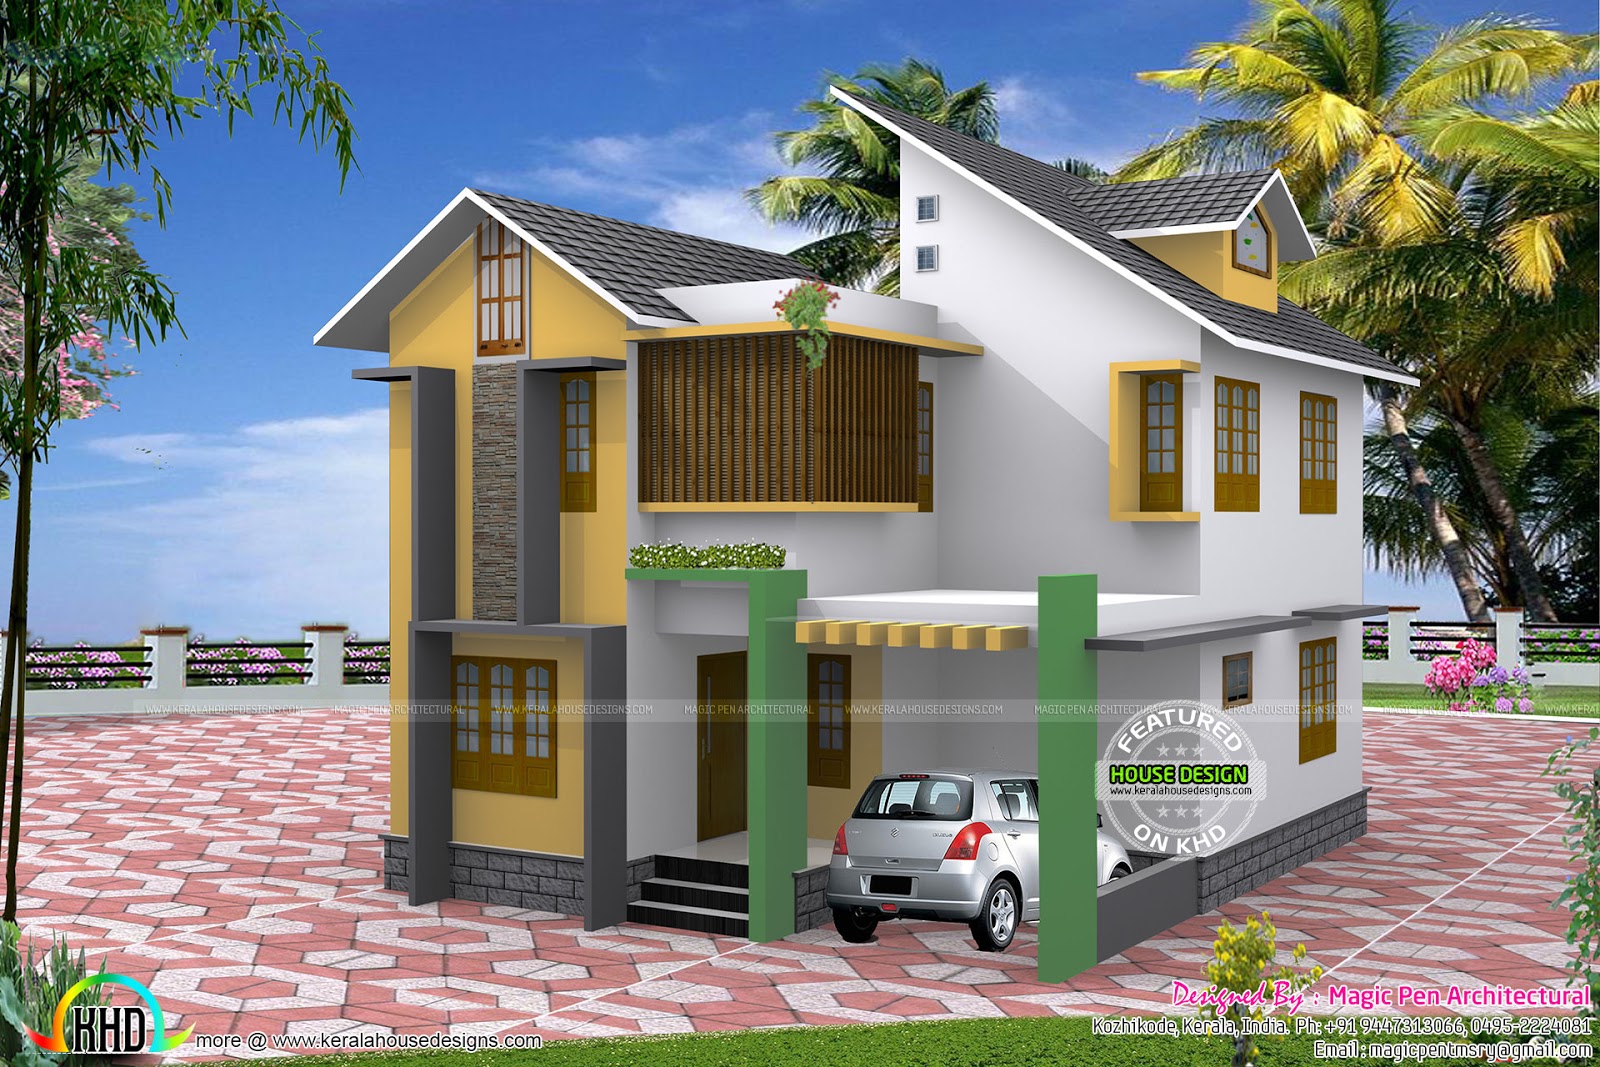 Three bedroom  small home  in 4  5  cents  Kerala home  design 